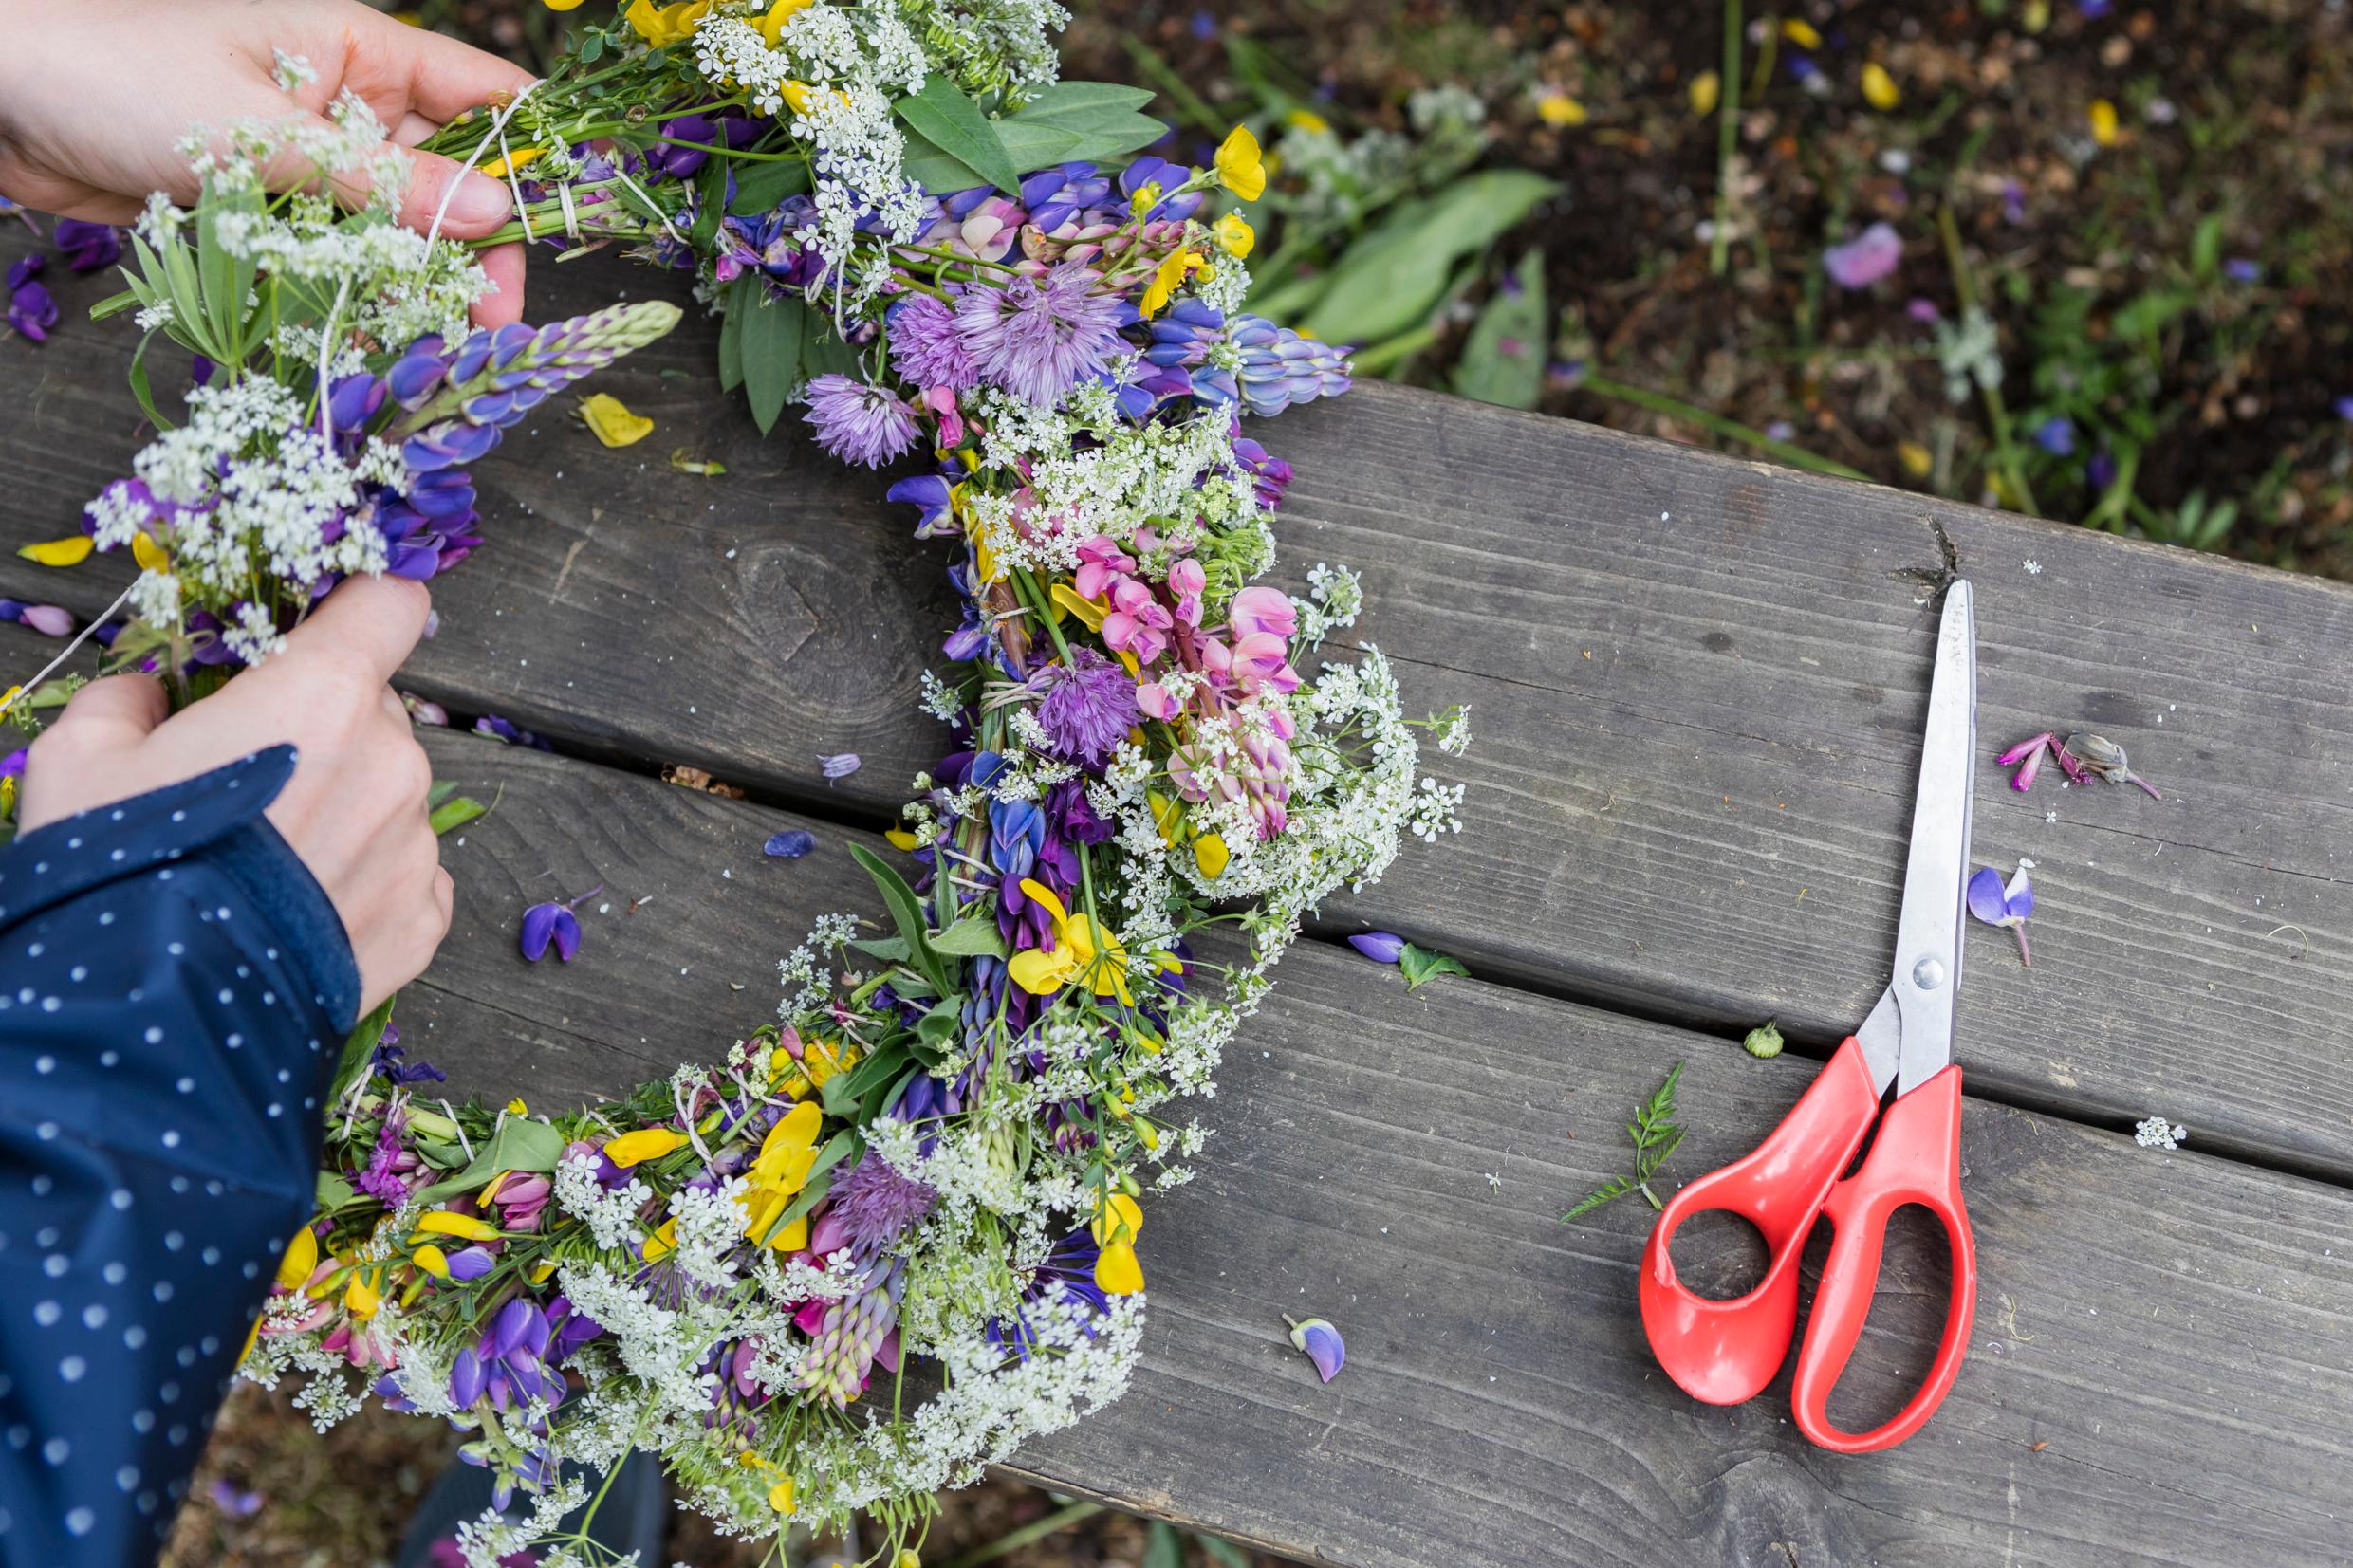 Two hands making a flower wreath. Scissors on the side.